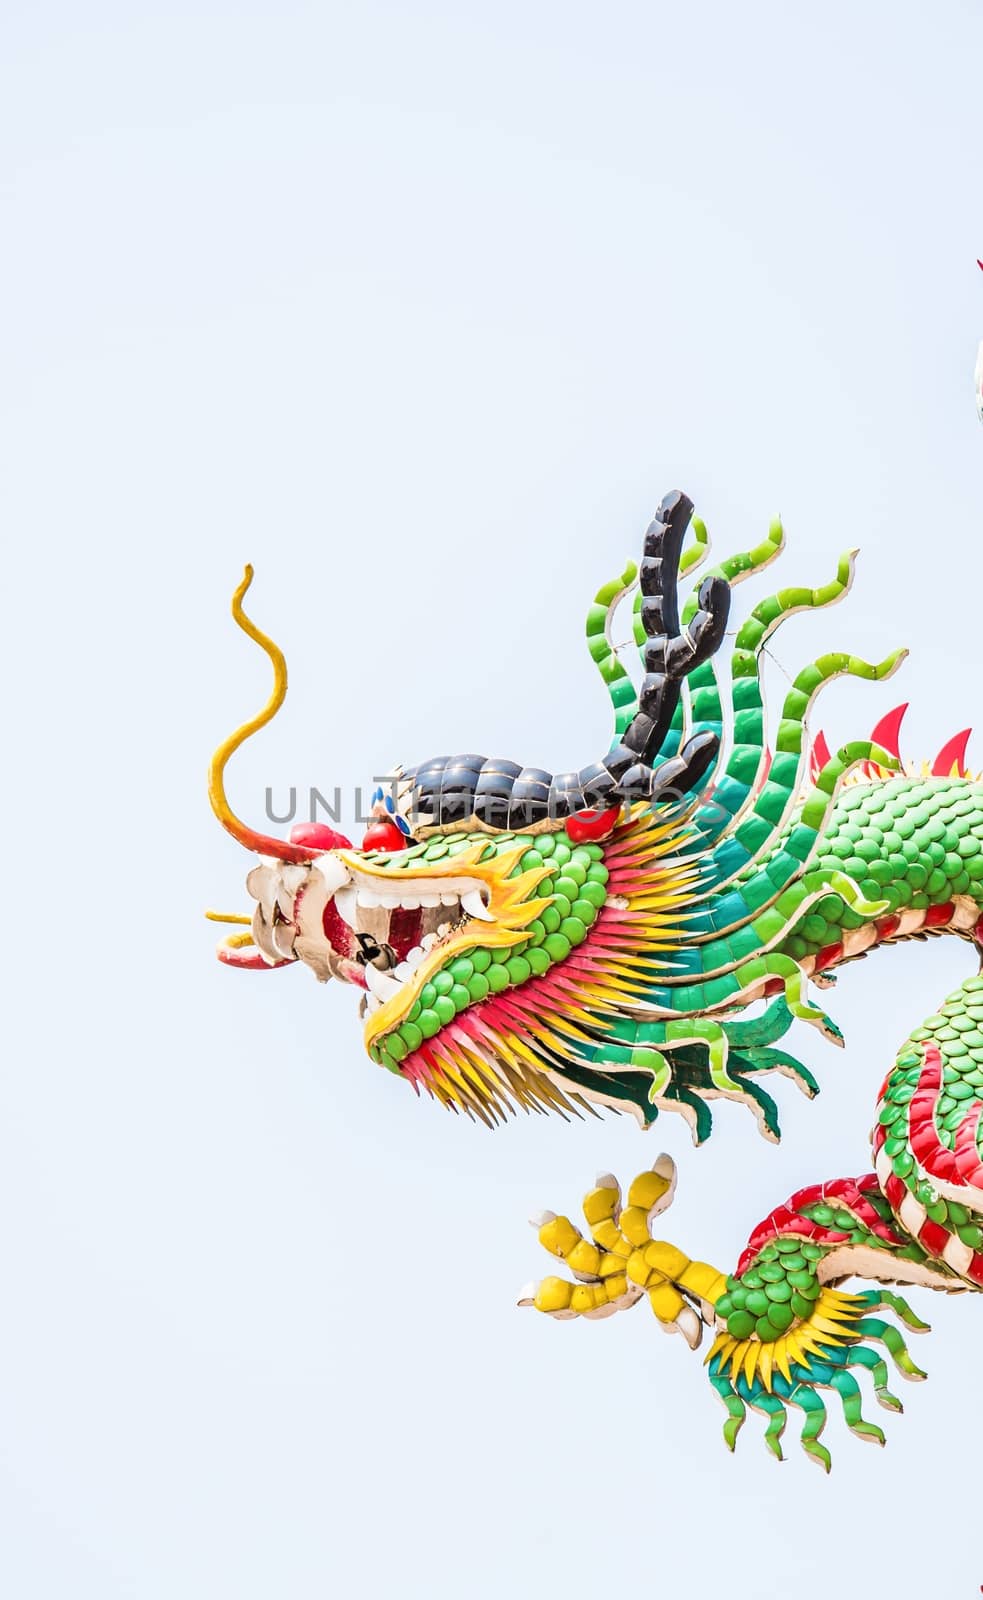 Chinese style dragon statue by wmitrmatr